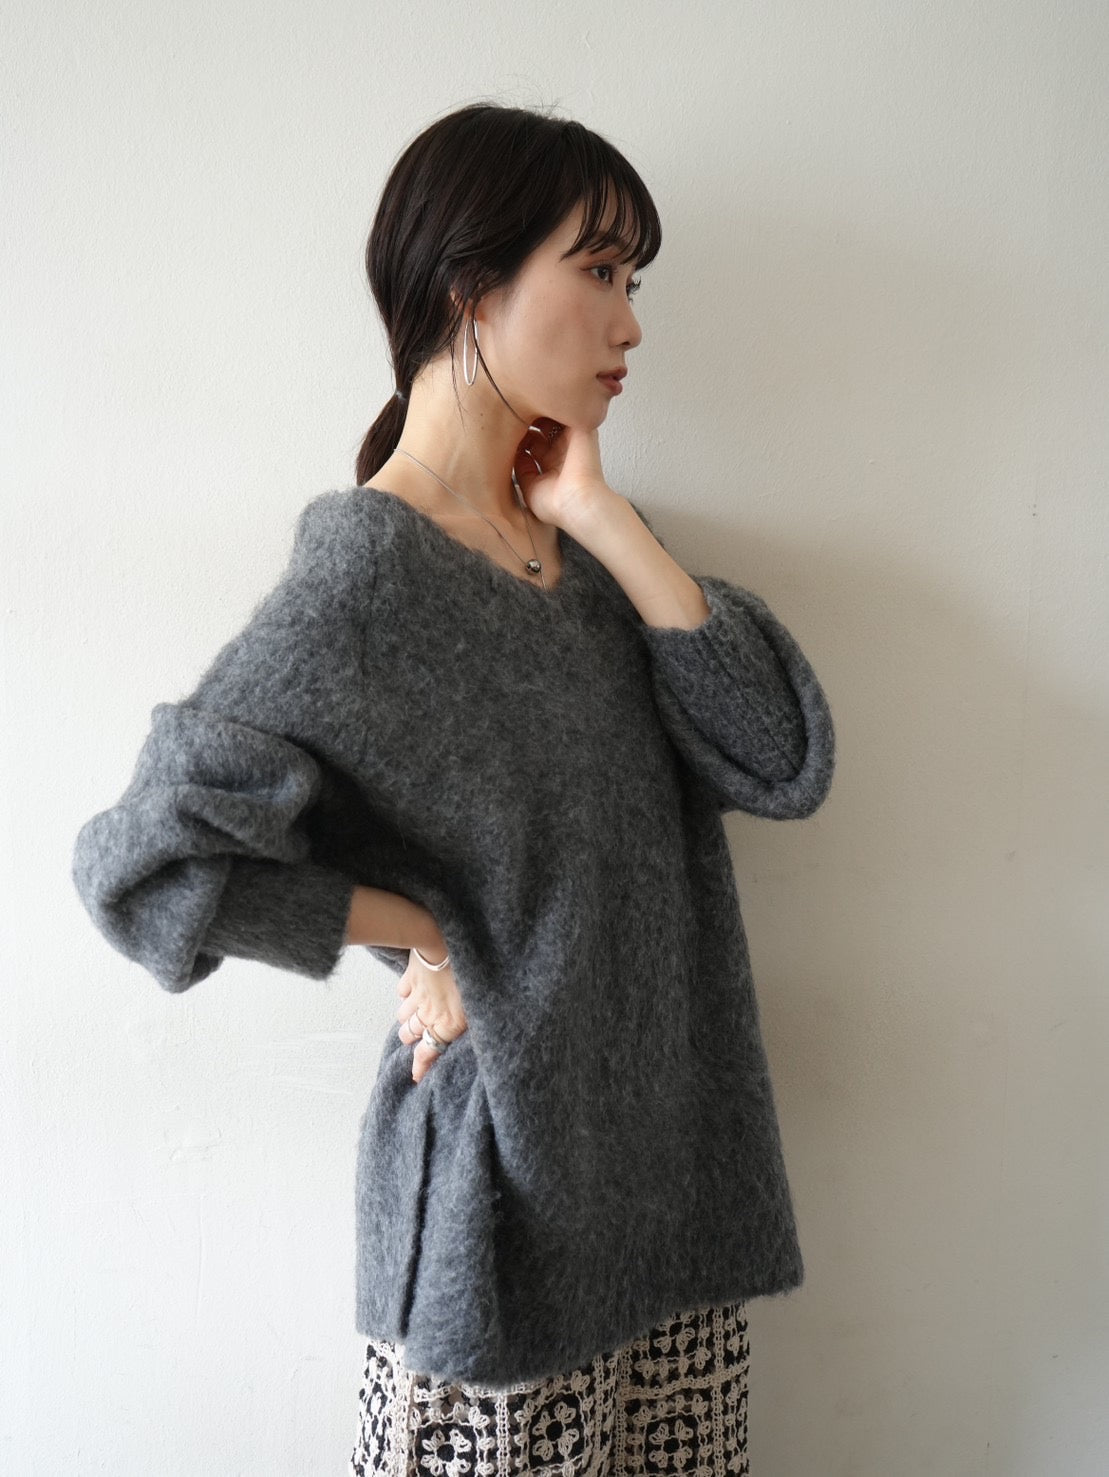 Knit Pullover Set One-Piece